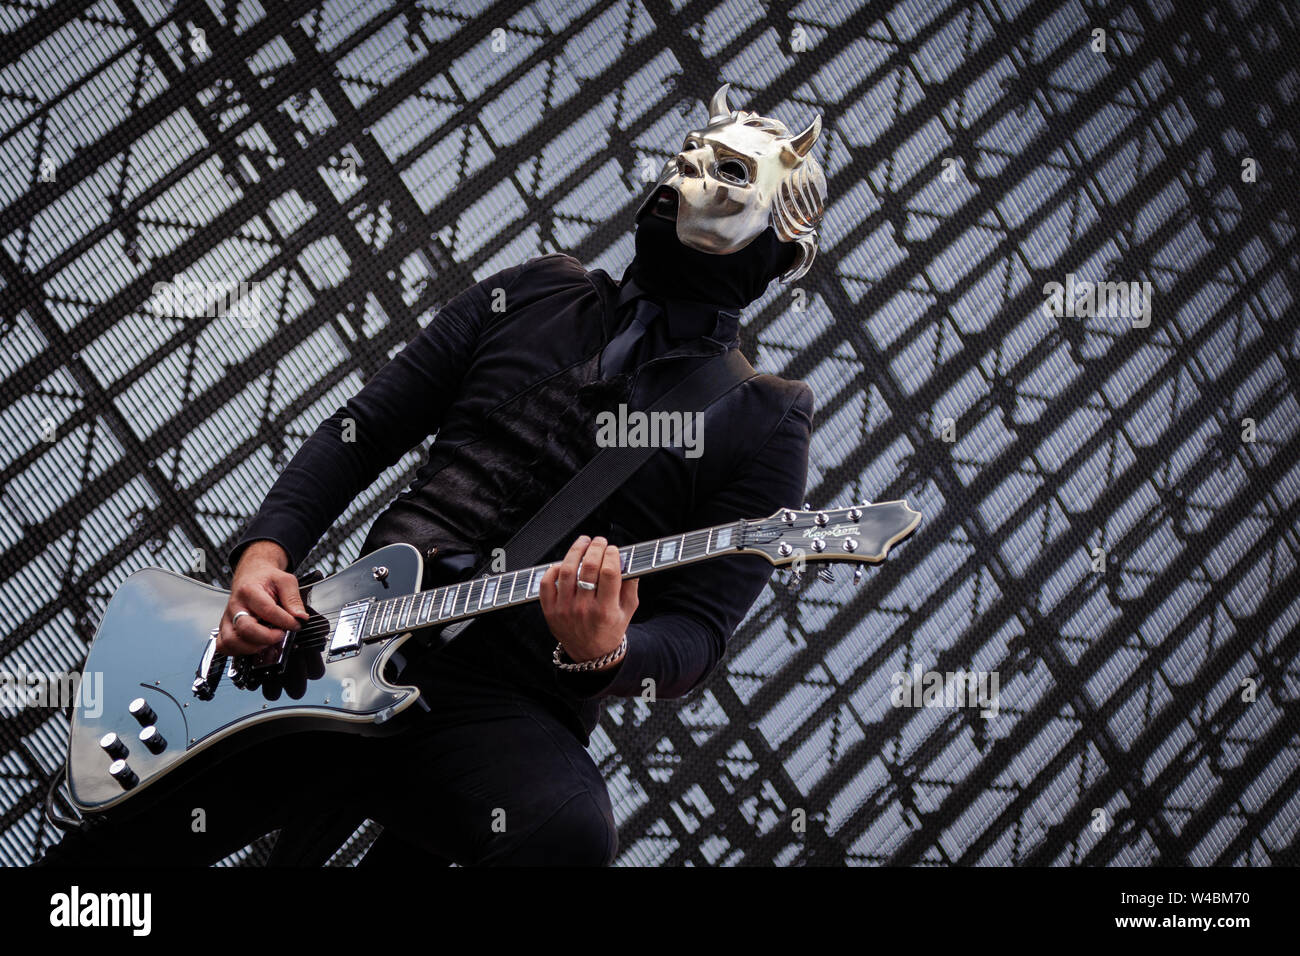 Trondheim, Norway - July 13th, 2019. The Swedish doom metal band Ghost  performs a live concert at Granåsen Arena in Trondheim. Here a band member,  a Nameless Ghoul, is seen live on